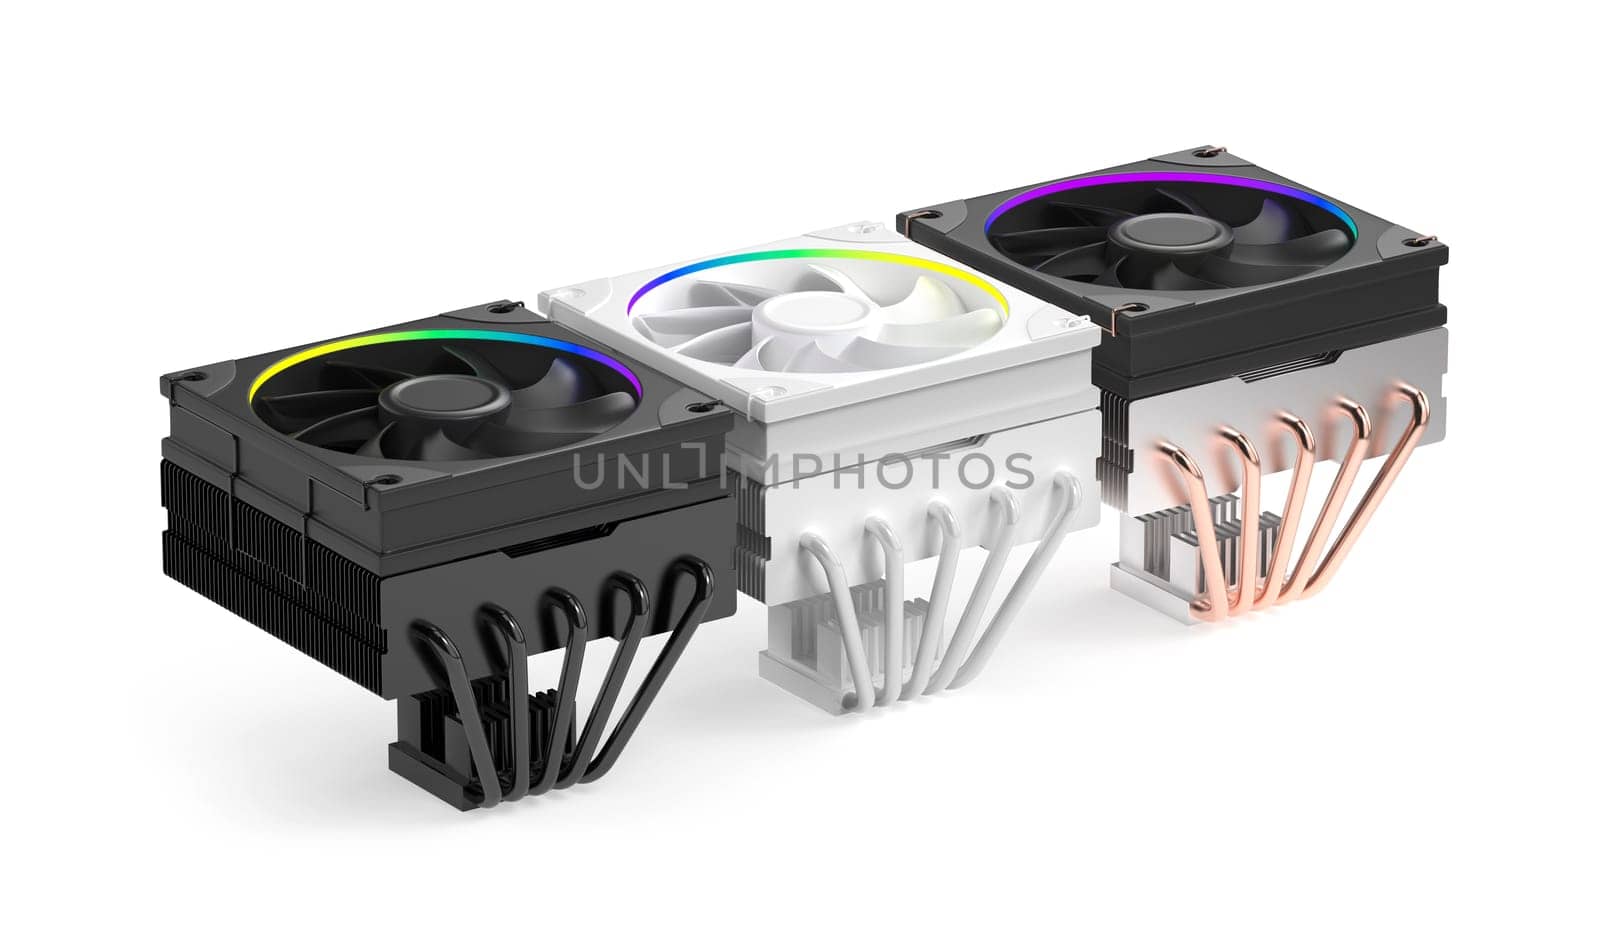 Five low-profile cpu air coolers with different colors on white background